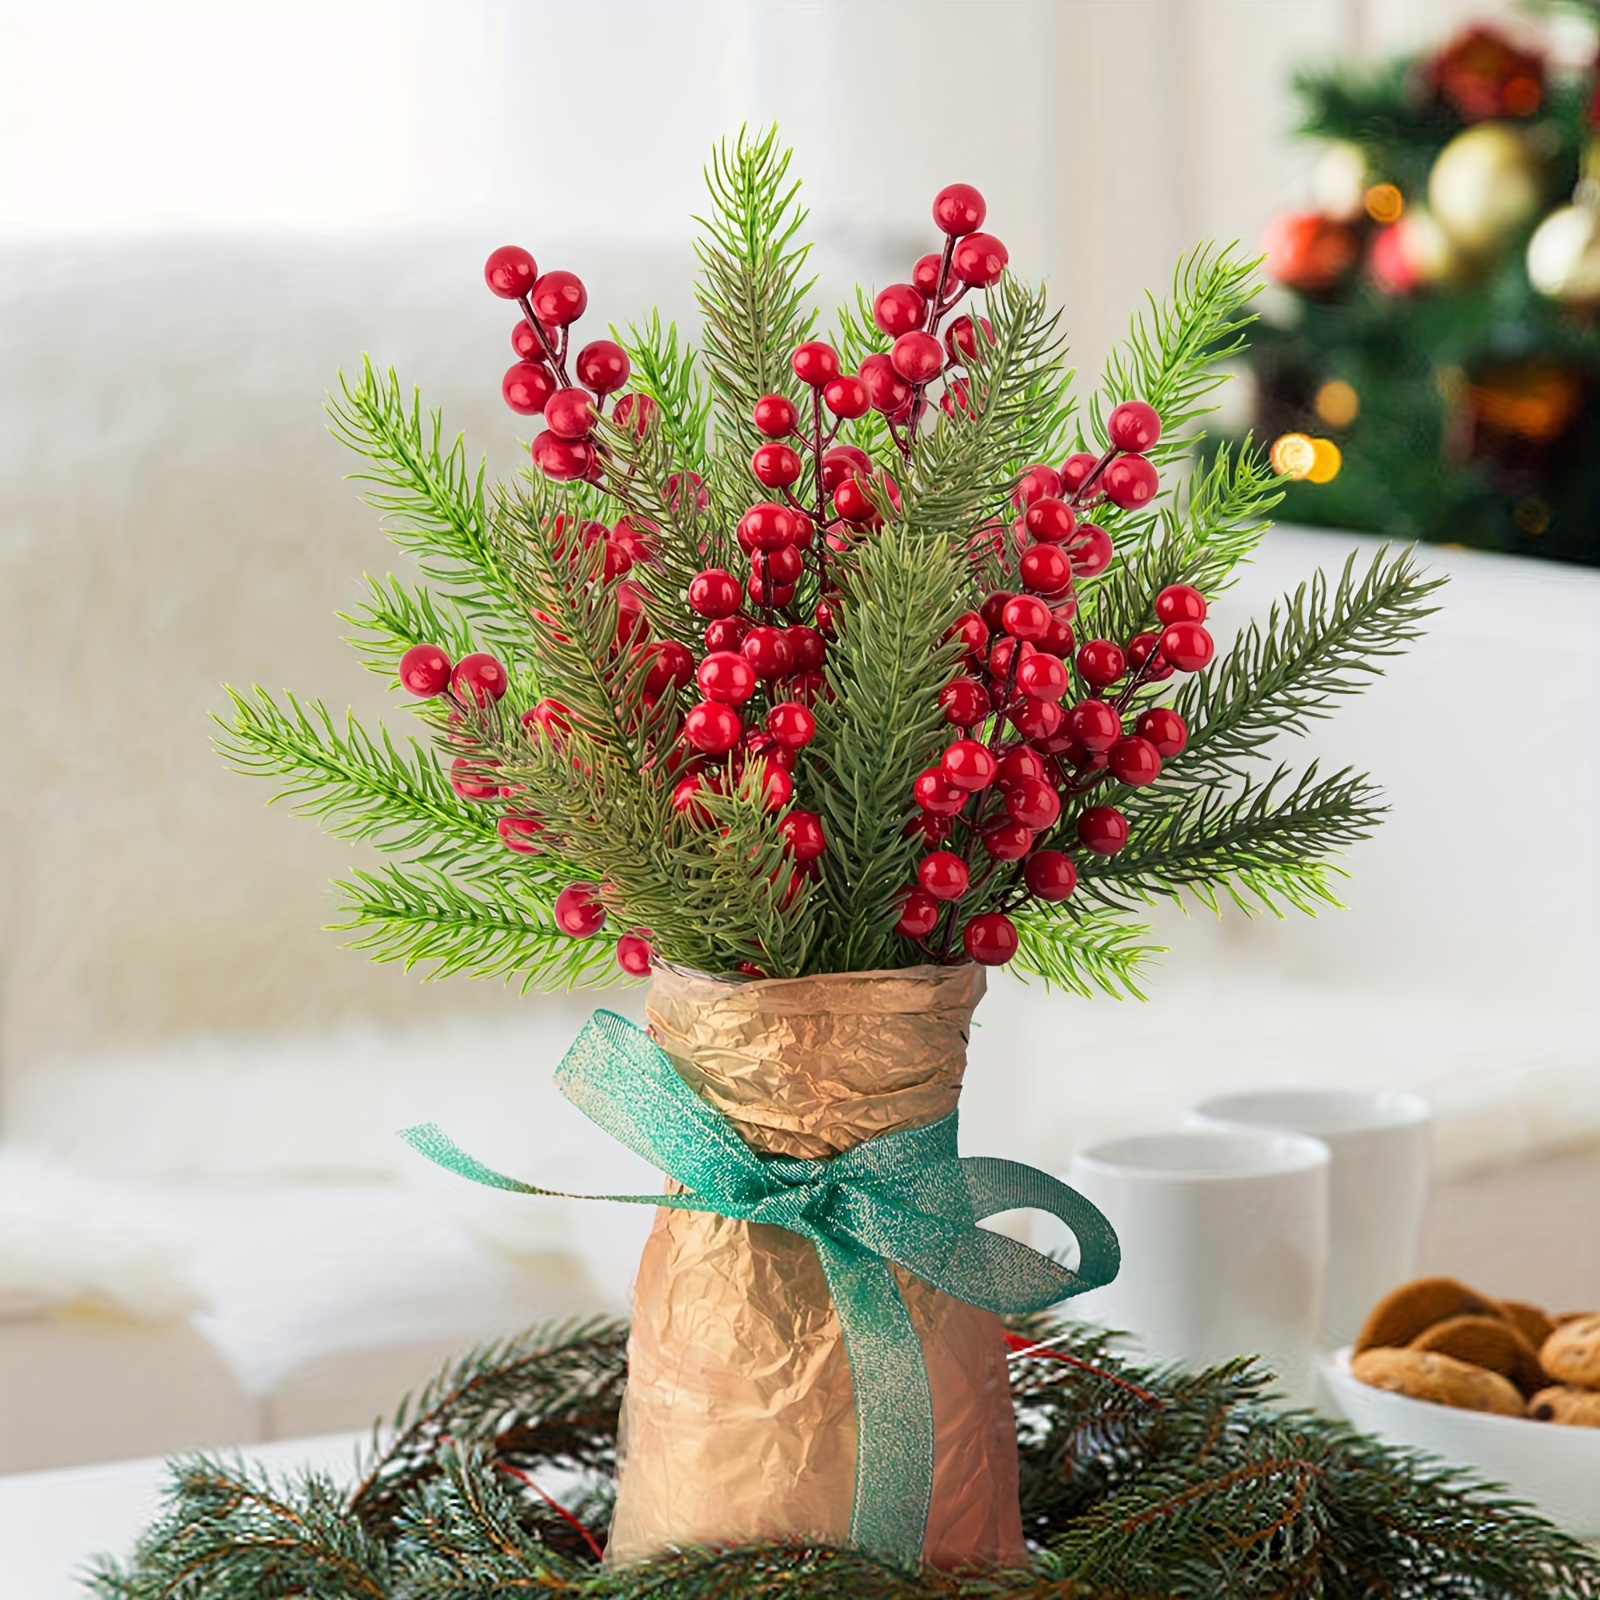 Galand Christmas Artificial Pine Branches for Decorating,Fake Greenery Pine  Picks Green Plant Pendant for DIY Garland,Christmas Wreath Decorations